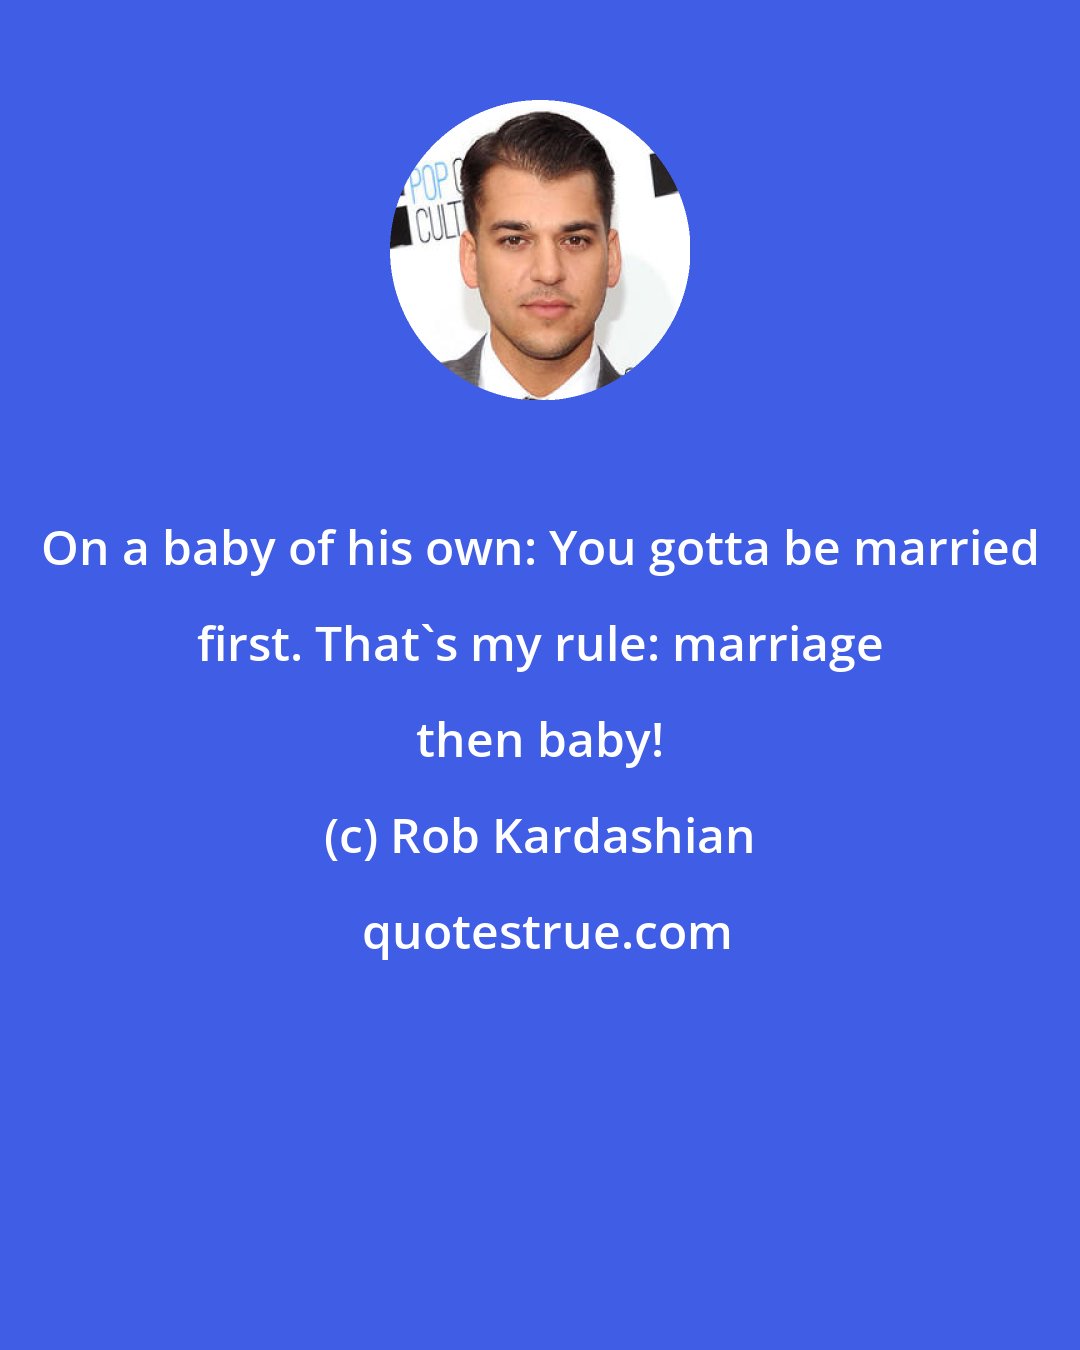 Rob Kardashian: On a baby of his own: You gotta be married first. That's my rule: marriage then baby!